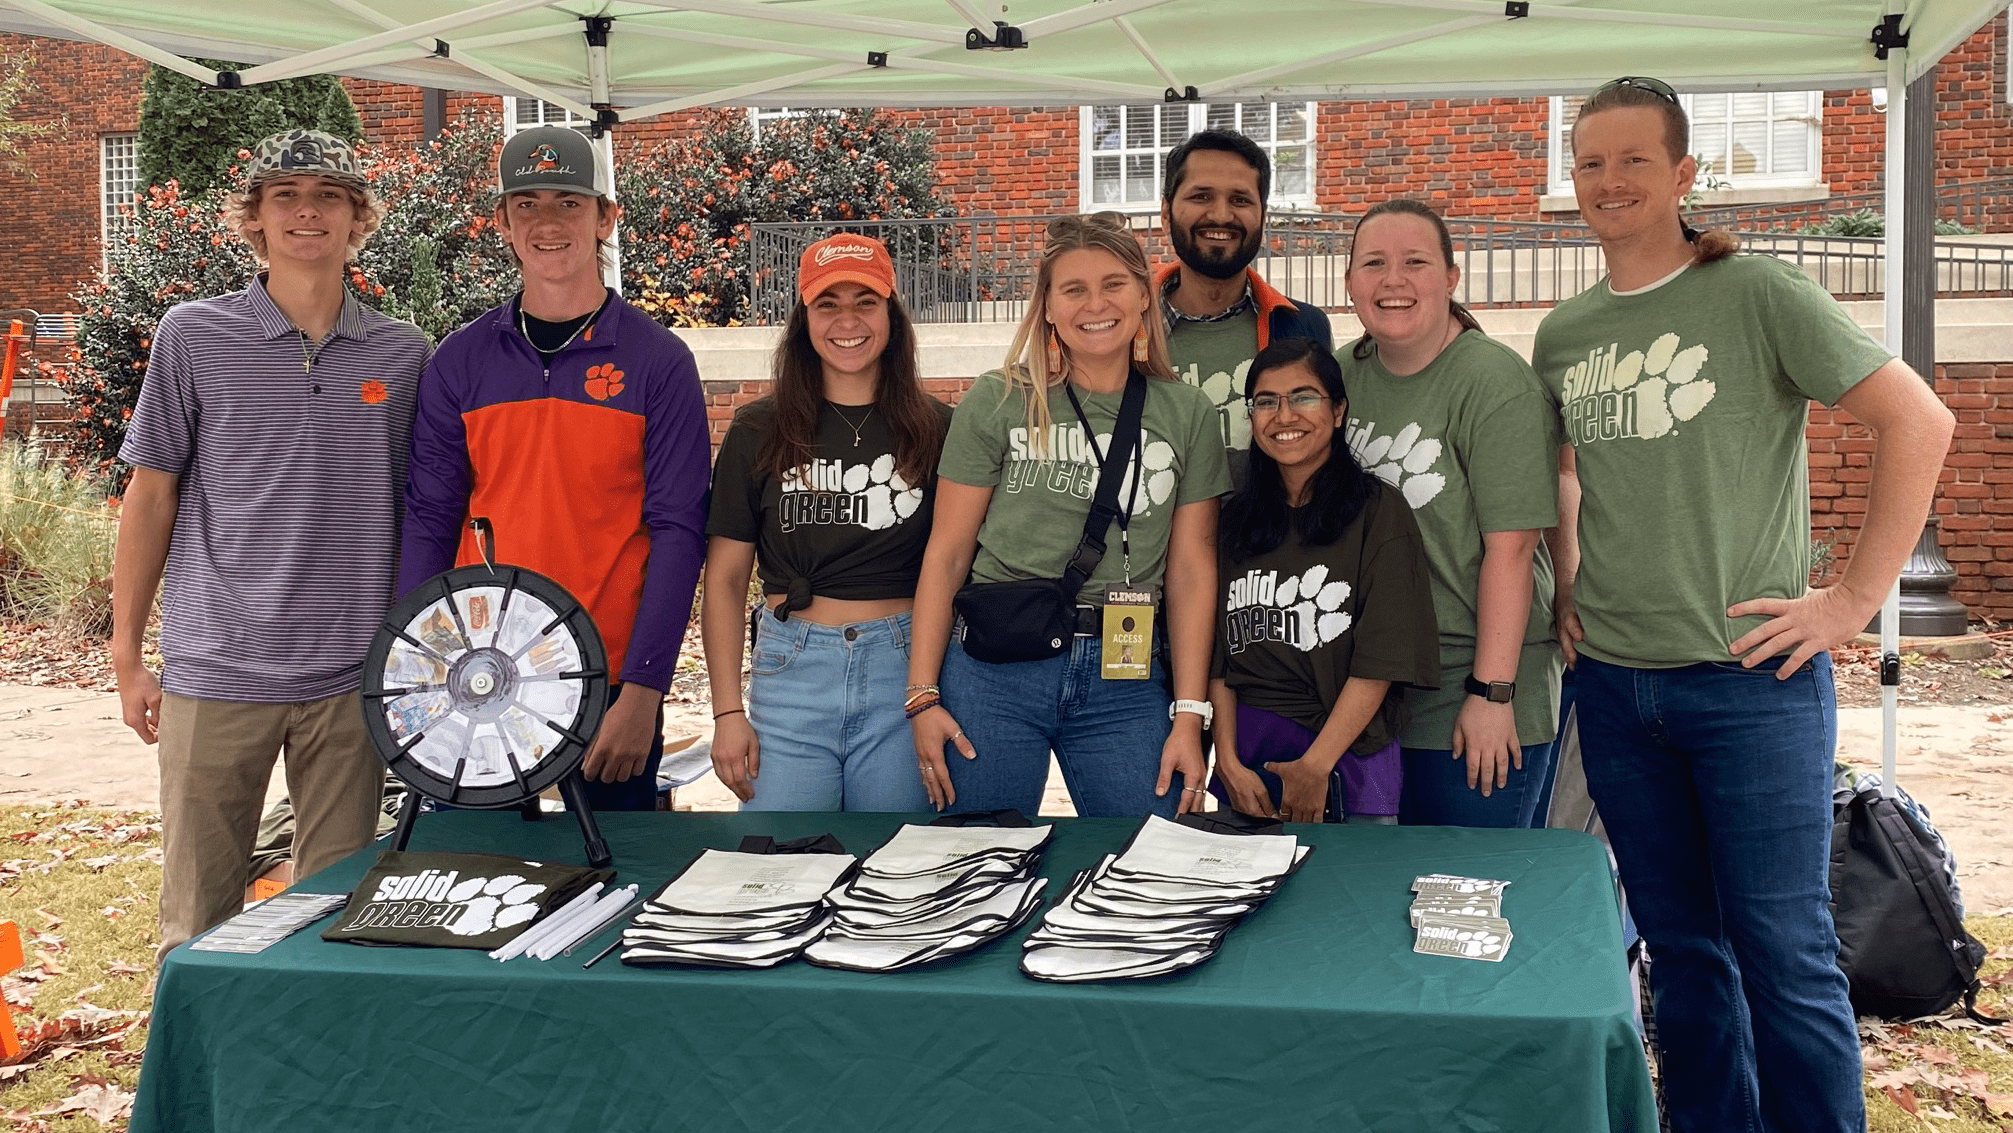 Clemson students from the Solid Green program pose under a green tent behind a green table with giveaway items